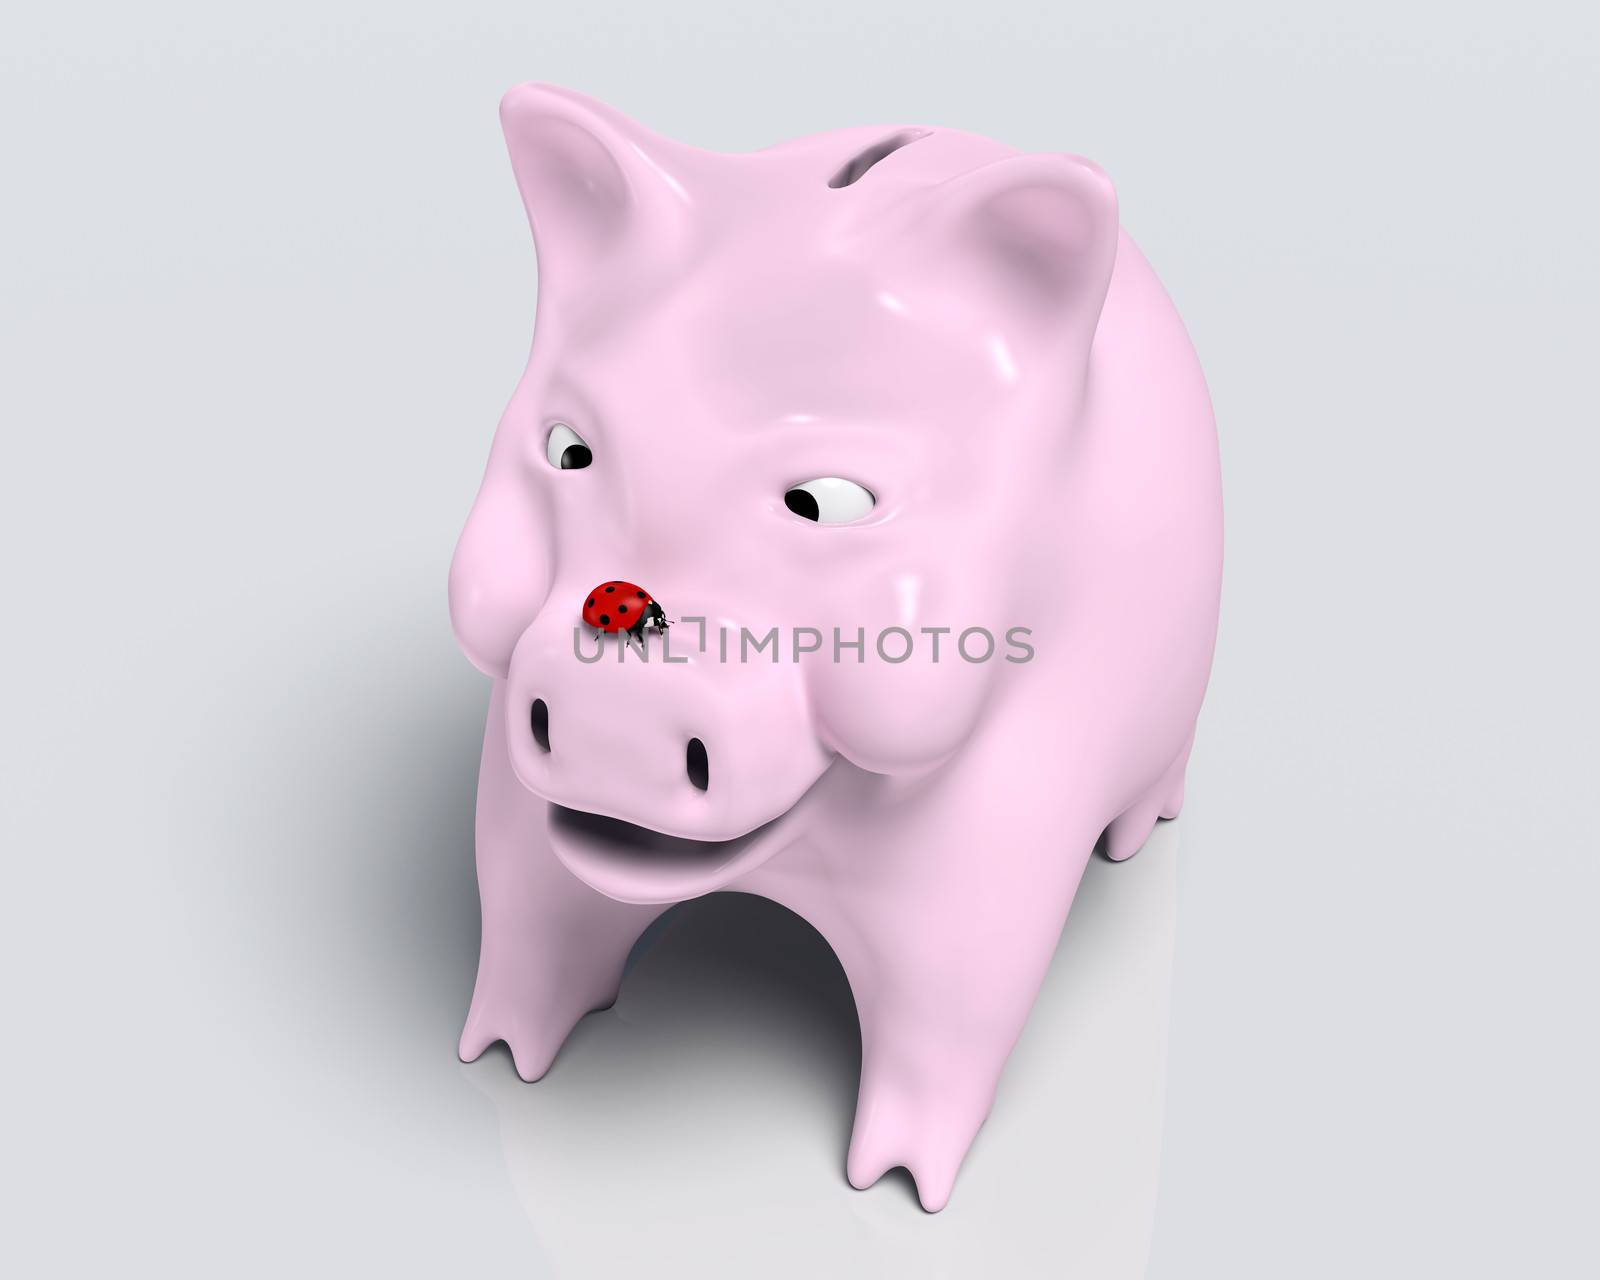 closeup of a smiling piggy bank that watches a red ladybird which stands on top of its nose, on a neutral background